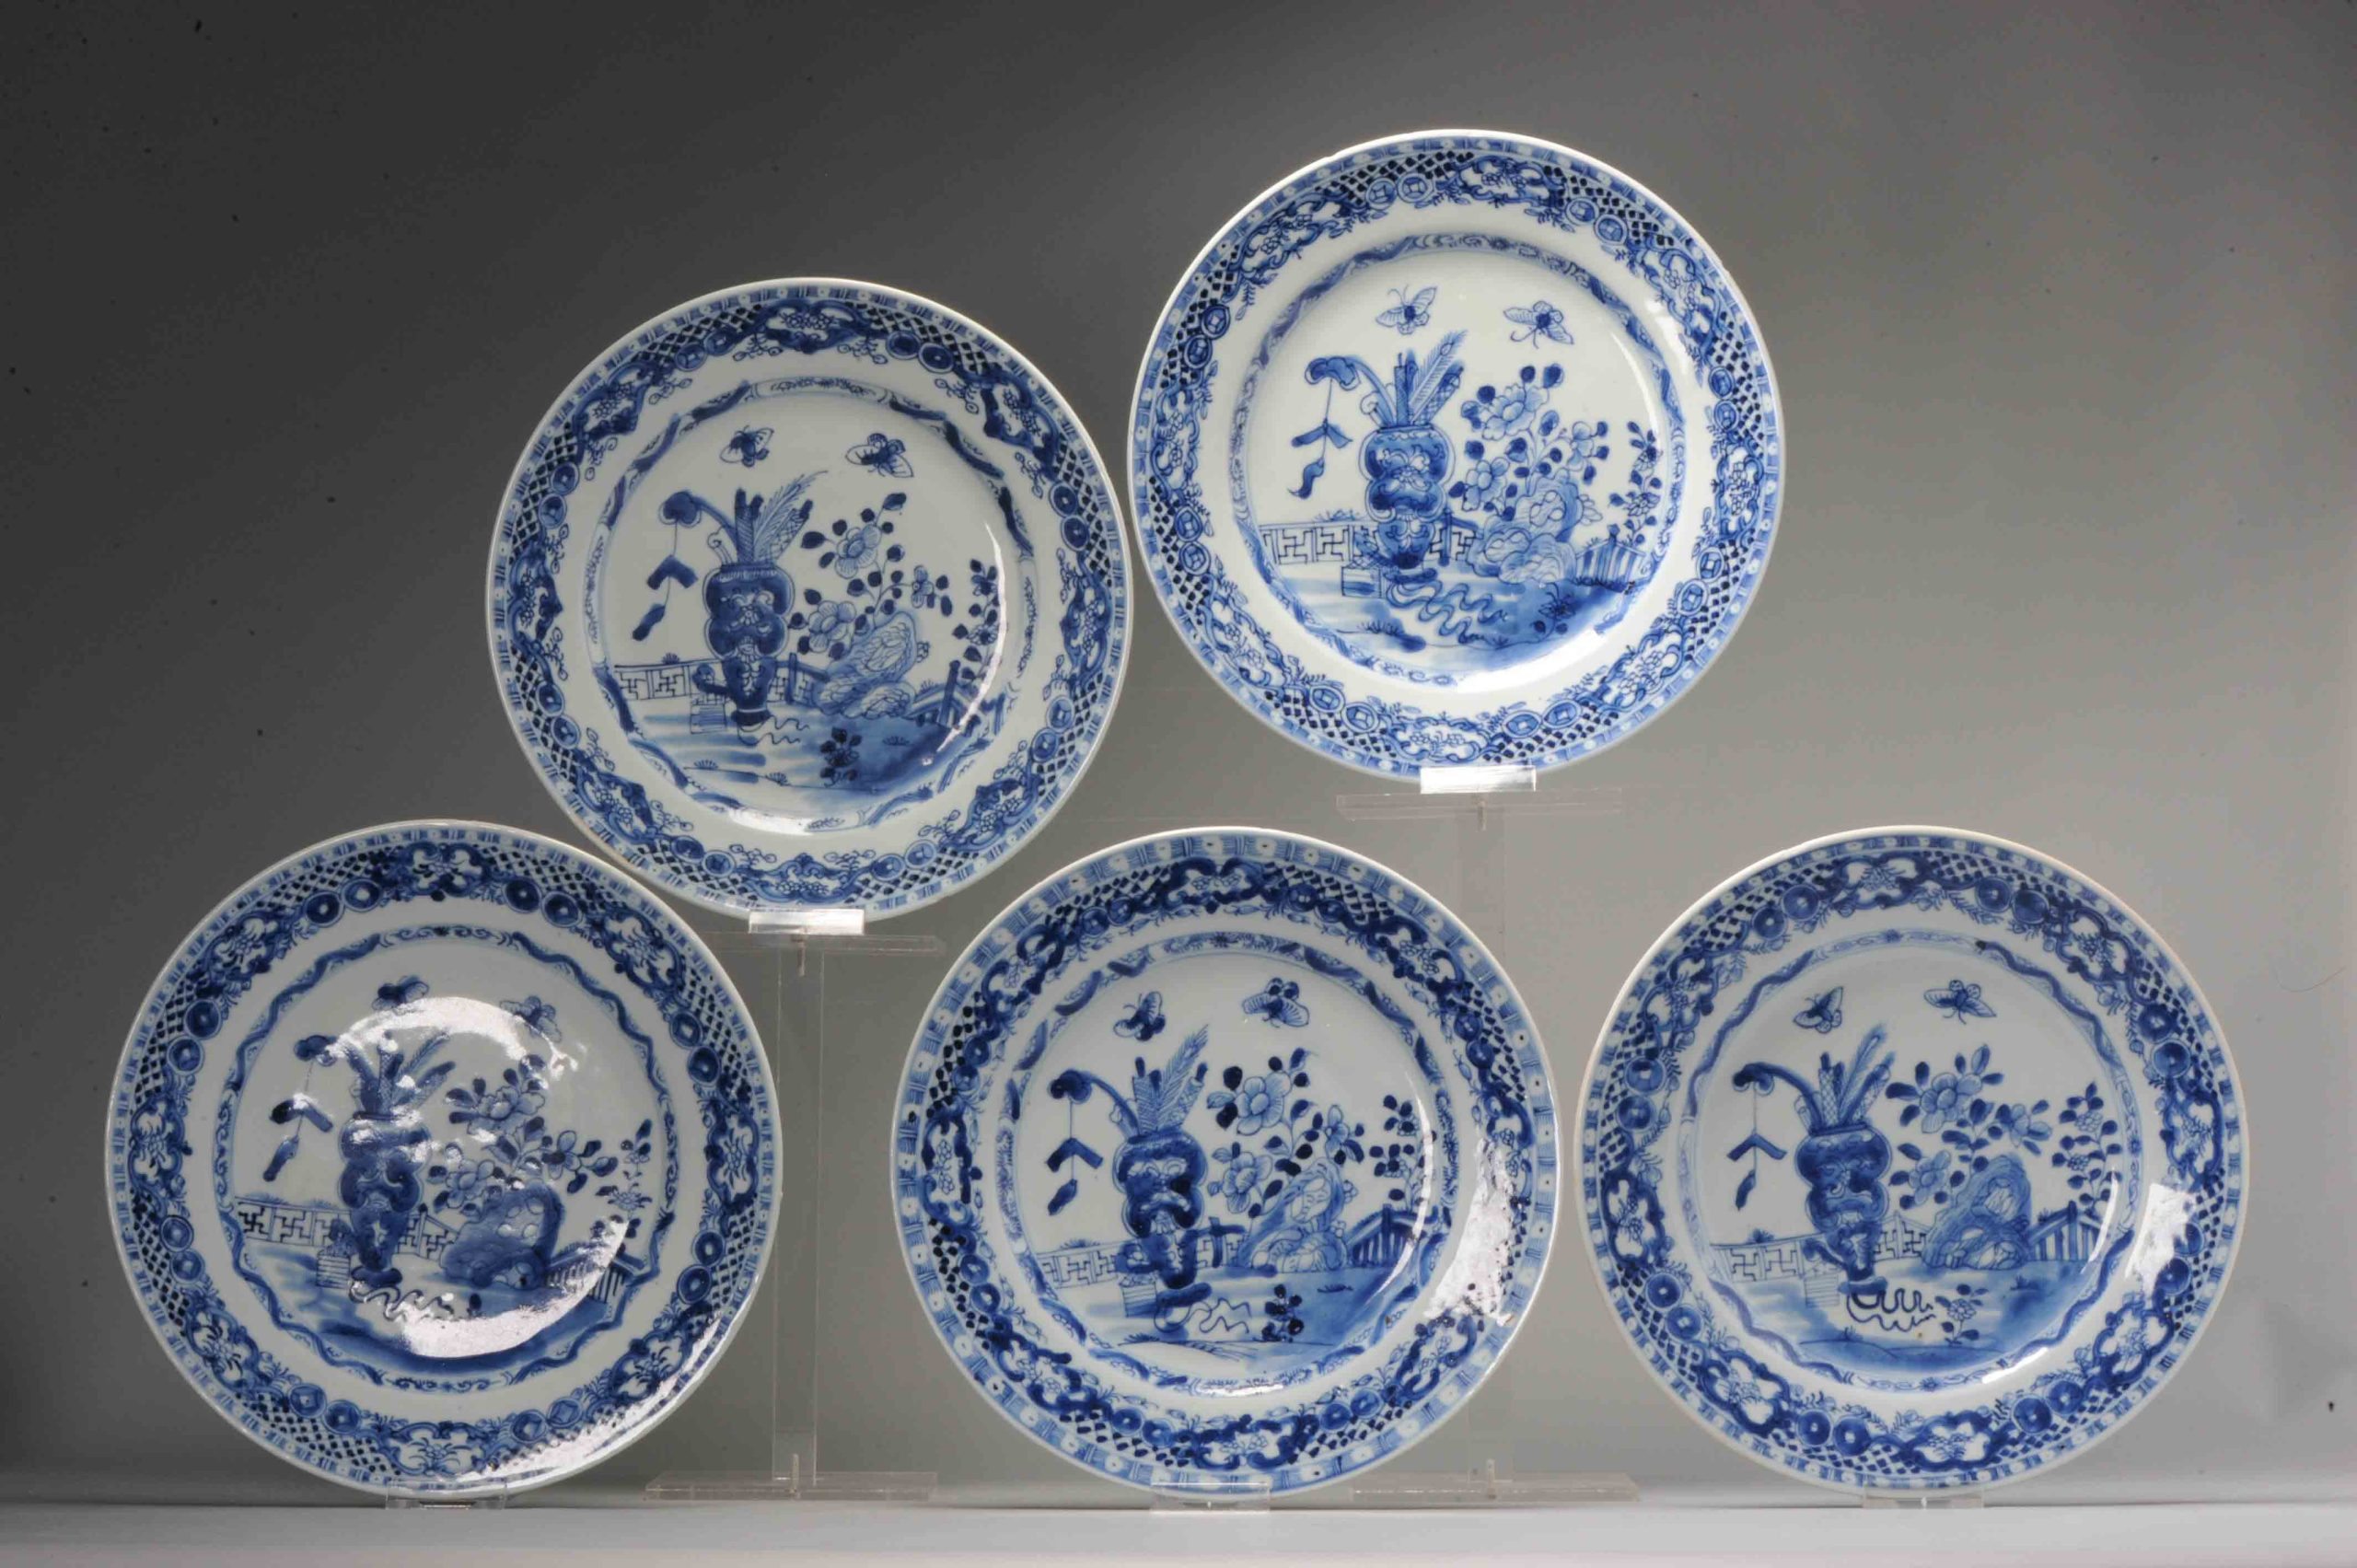 #5 Antique Chinese Porcelain 18th C Qing Period Blue White Set Dinner Plates